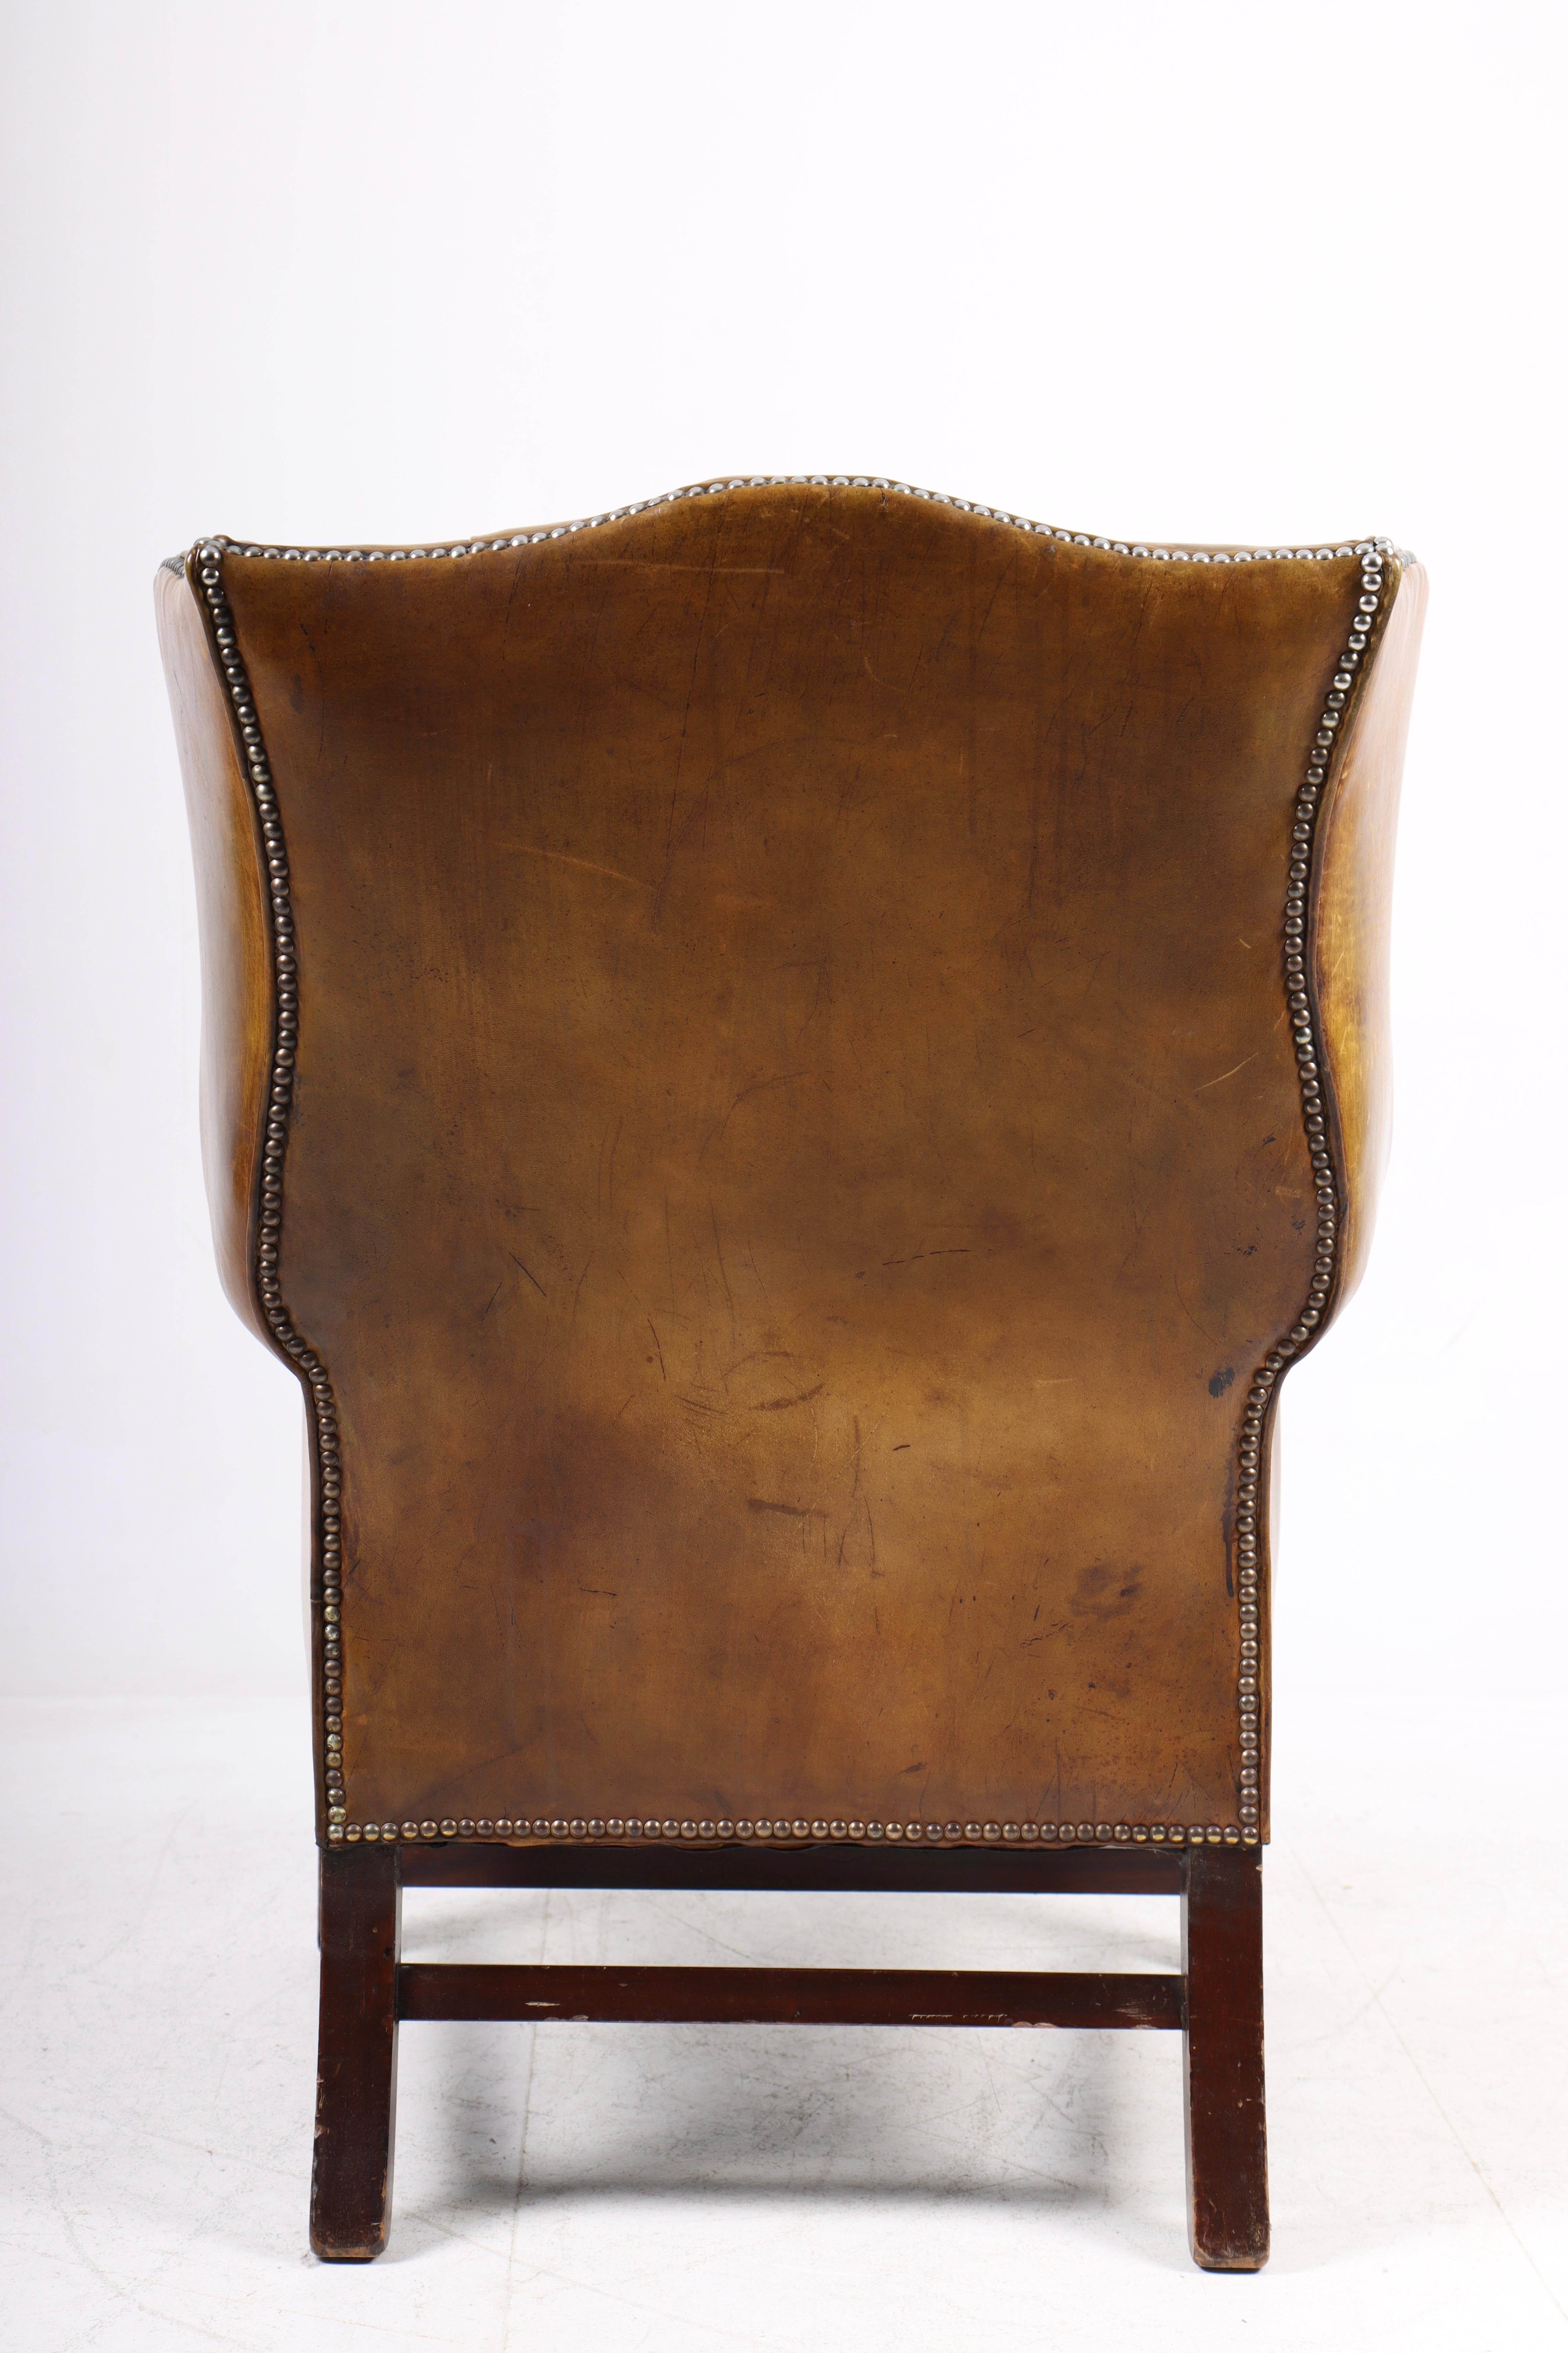 Chesterfield Wingback Chair in Leather, Made in Denmark 1950s For Sale 2